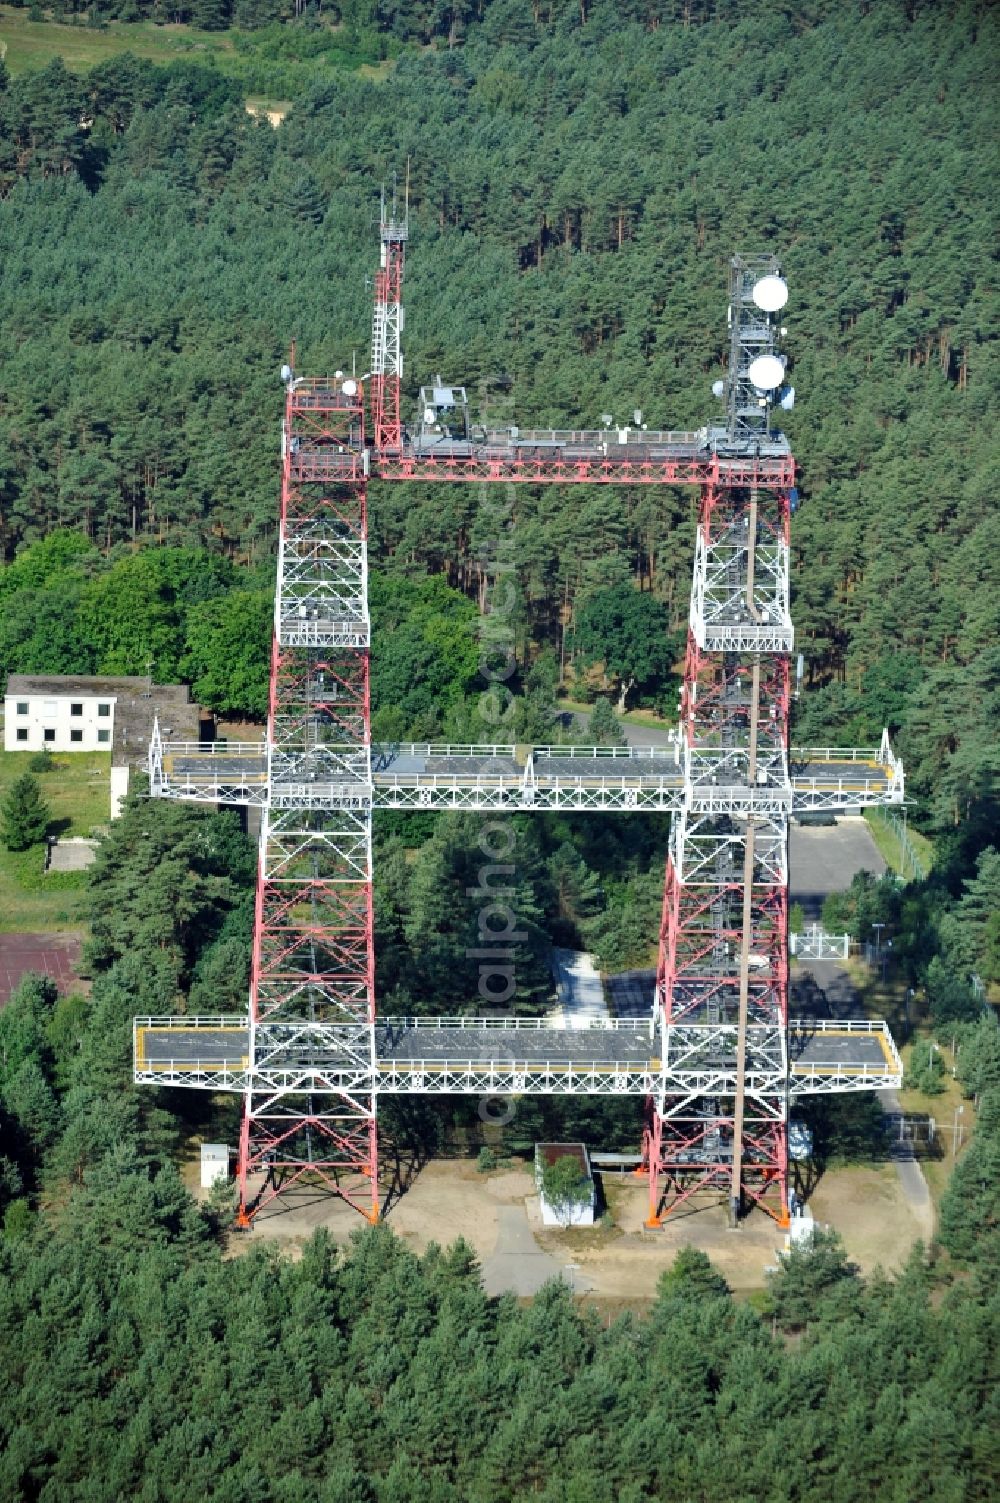 Gusborn from the bird's eye view: View of the telecommunications tower Torii Tower near Gusborn in Lower Saxony. The 1972 built steel lattice tower is designed as a twin-tower and was made ??in the USA. While it originally served as a listening post, it is now an antenna support for public safety and mobile phones